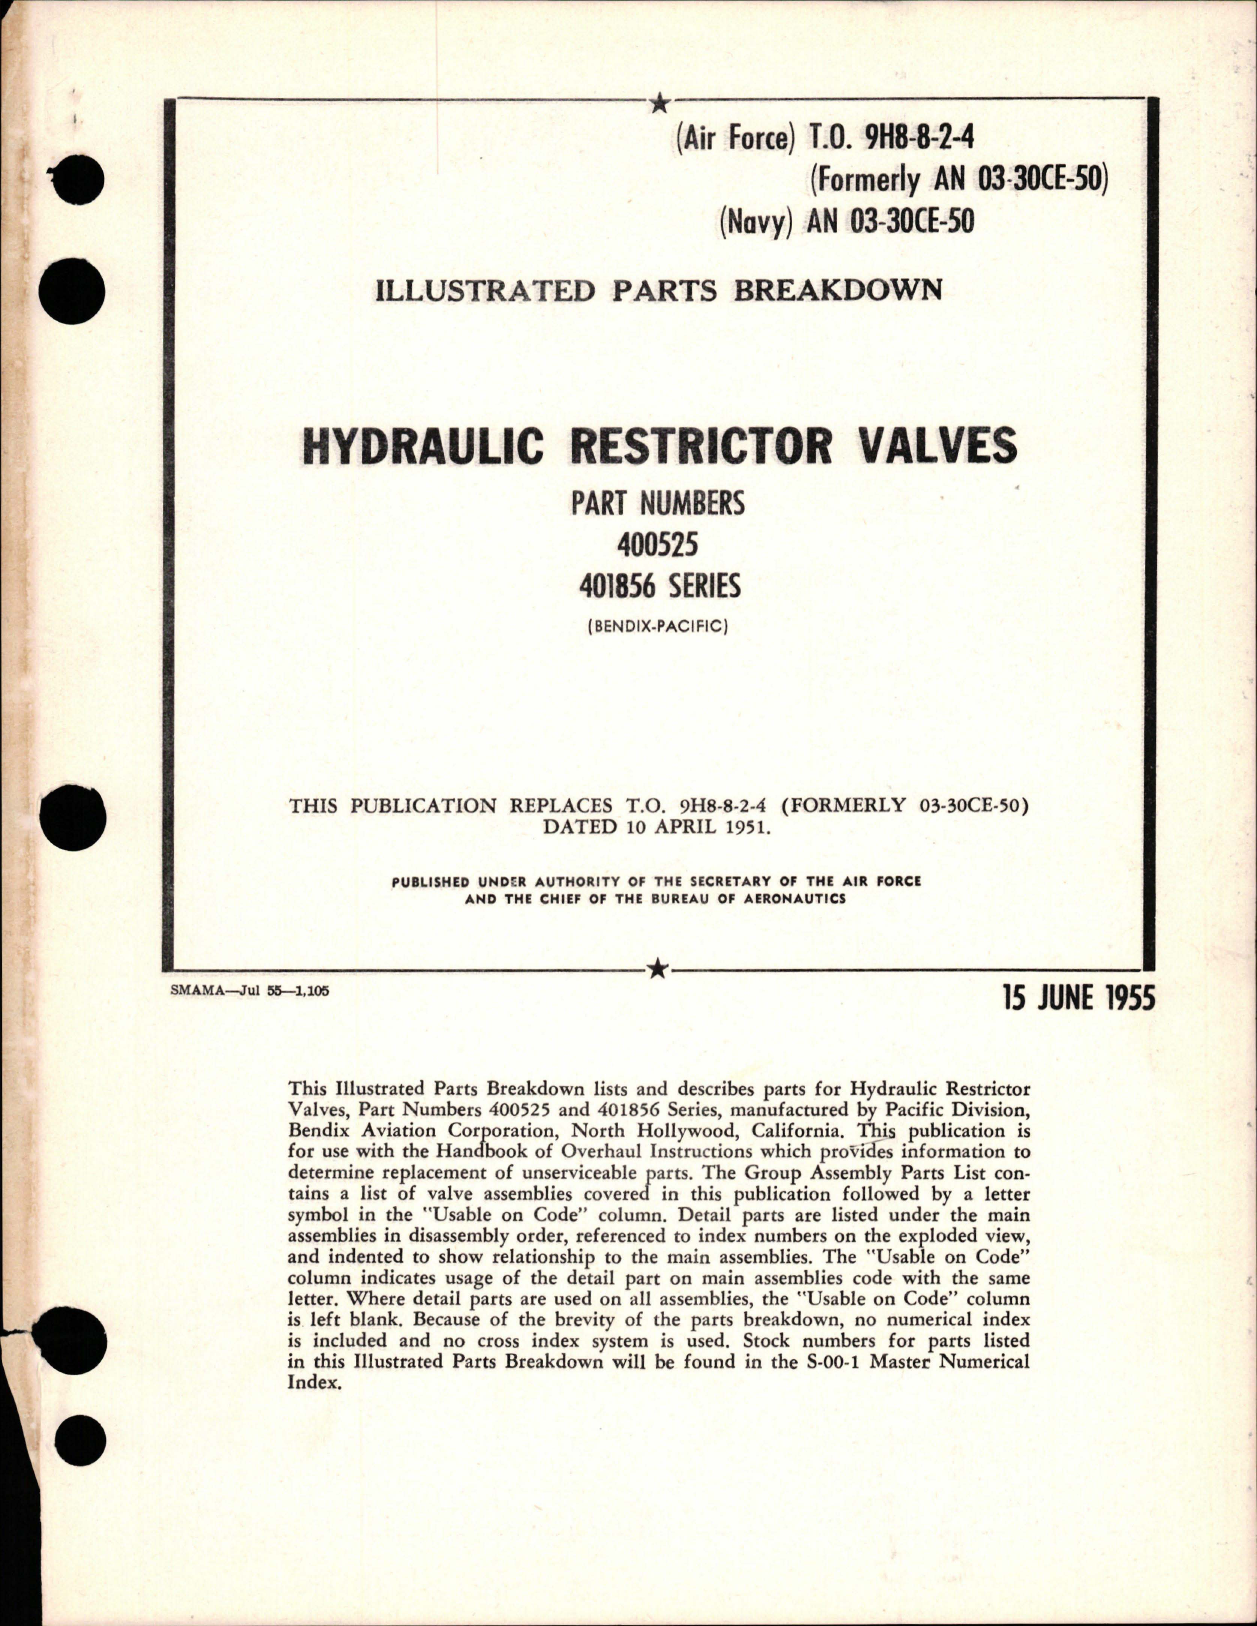 Sample page 1 from AirCorps Library document: Illustrated Parts Breakdown for Hydraulic Restrictor Valves - Parts 400525 and 401856 Series